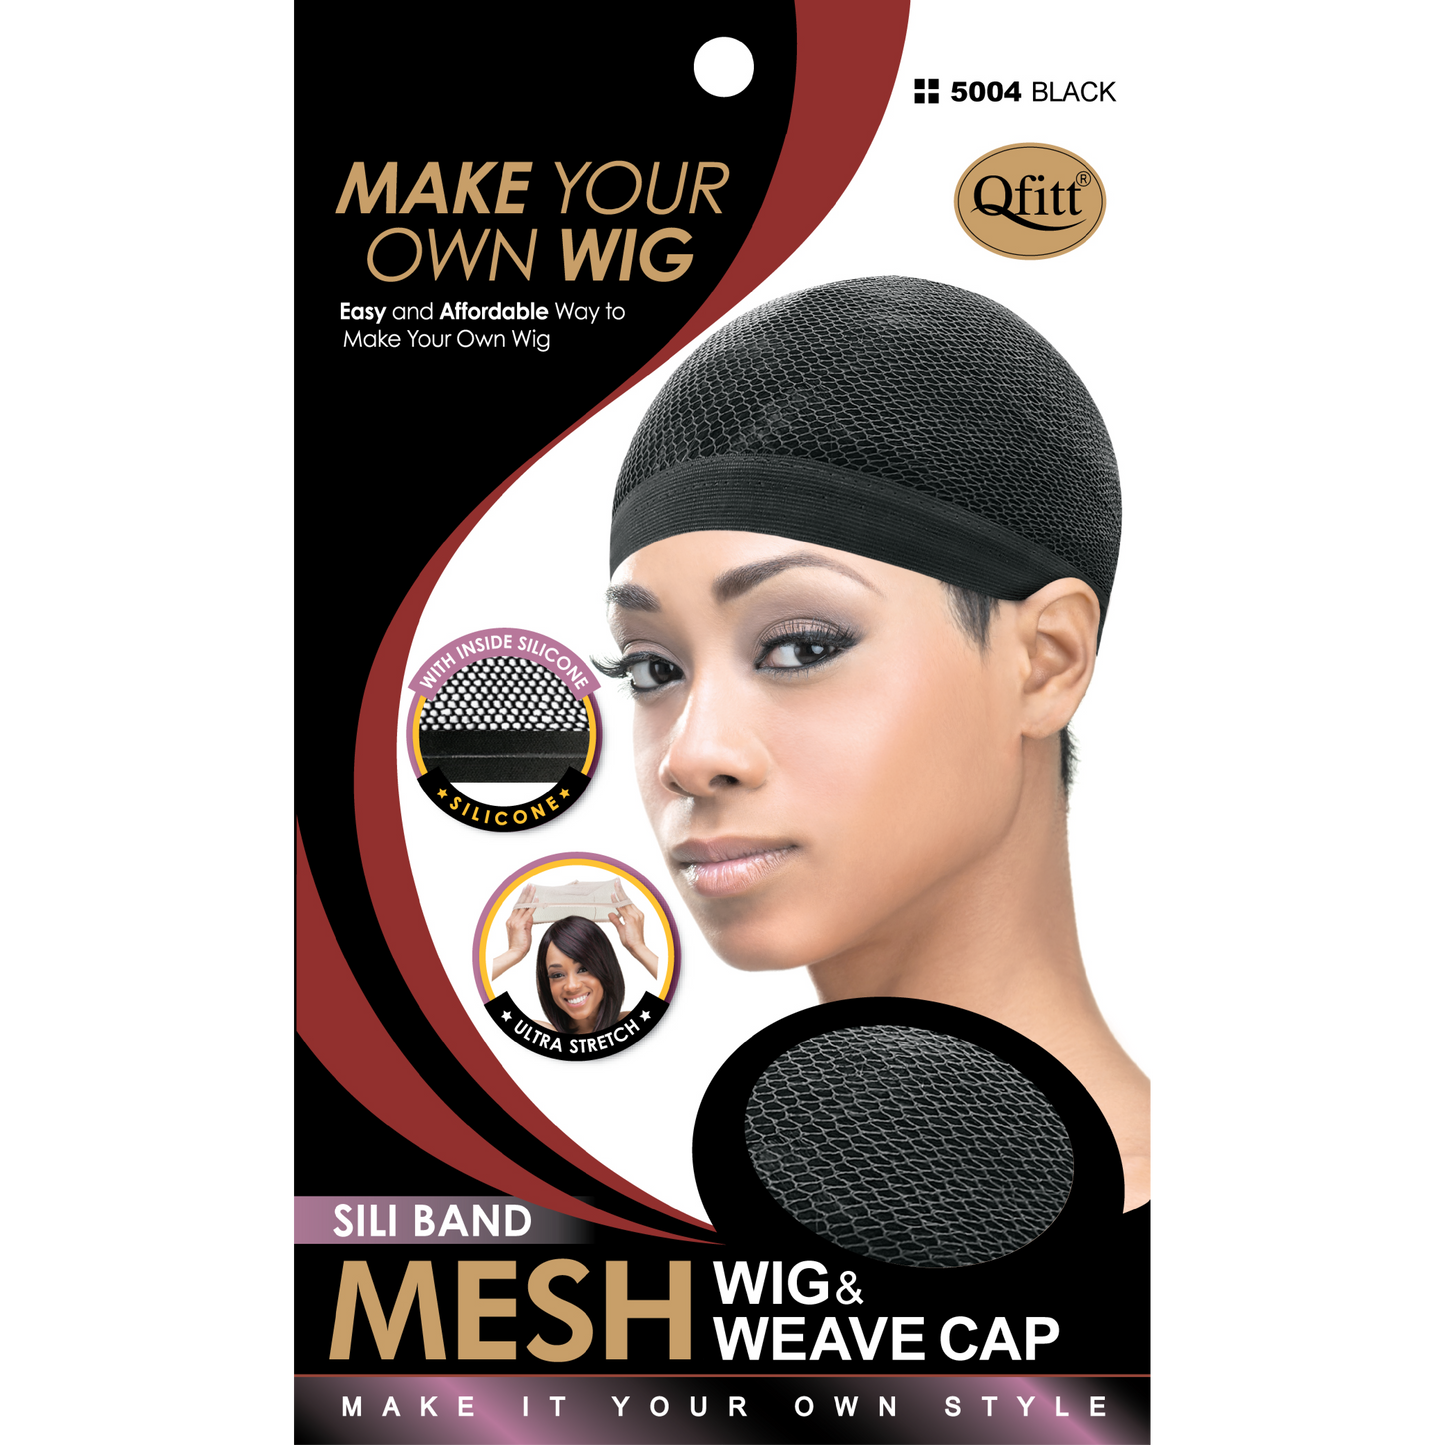 SILICONE BAND MESH WIG & WAVE CAP